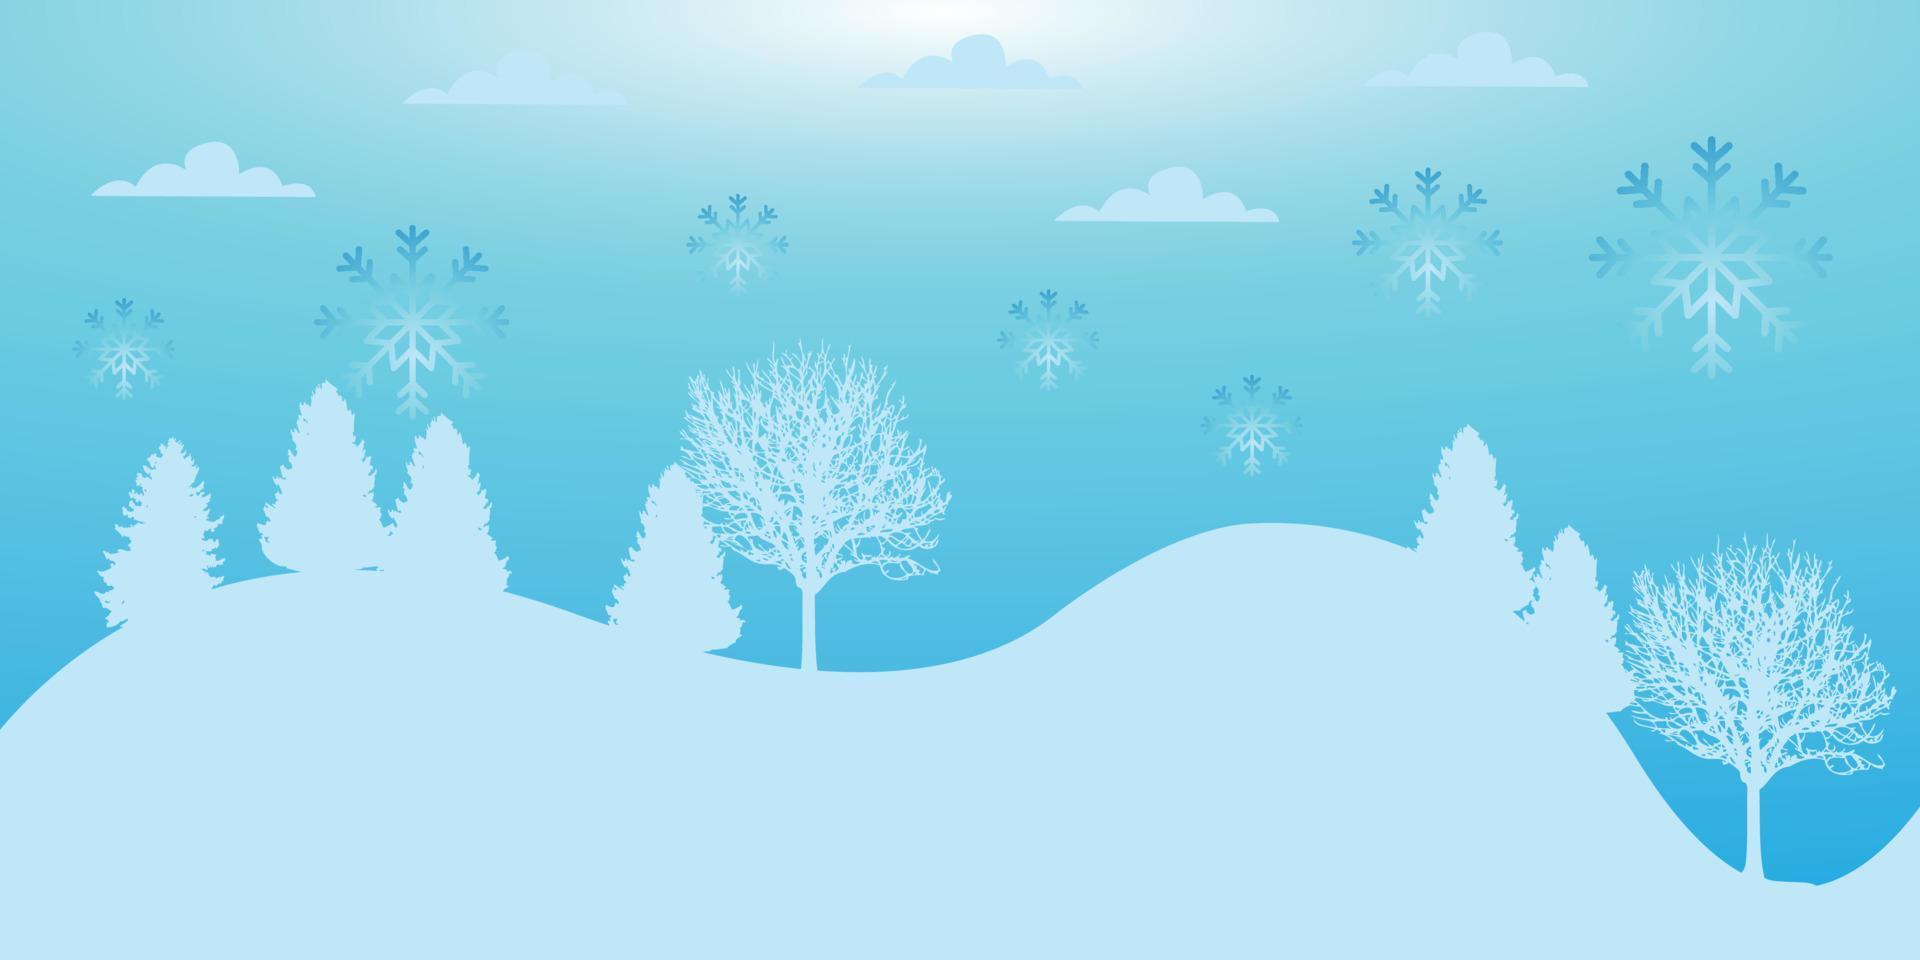 Winter nature landscape panorama with spruce-trees near the snowy mountains vector